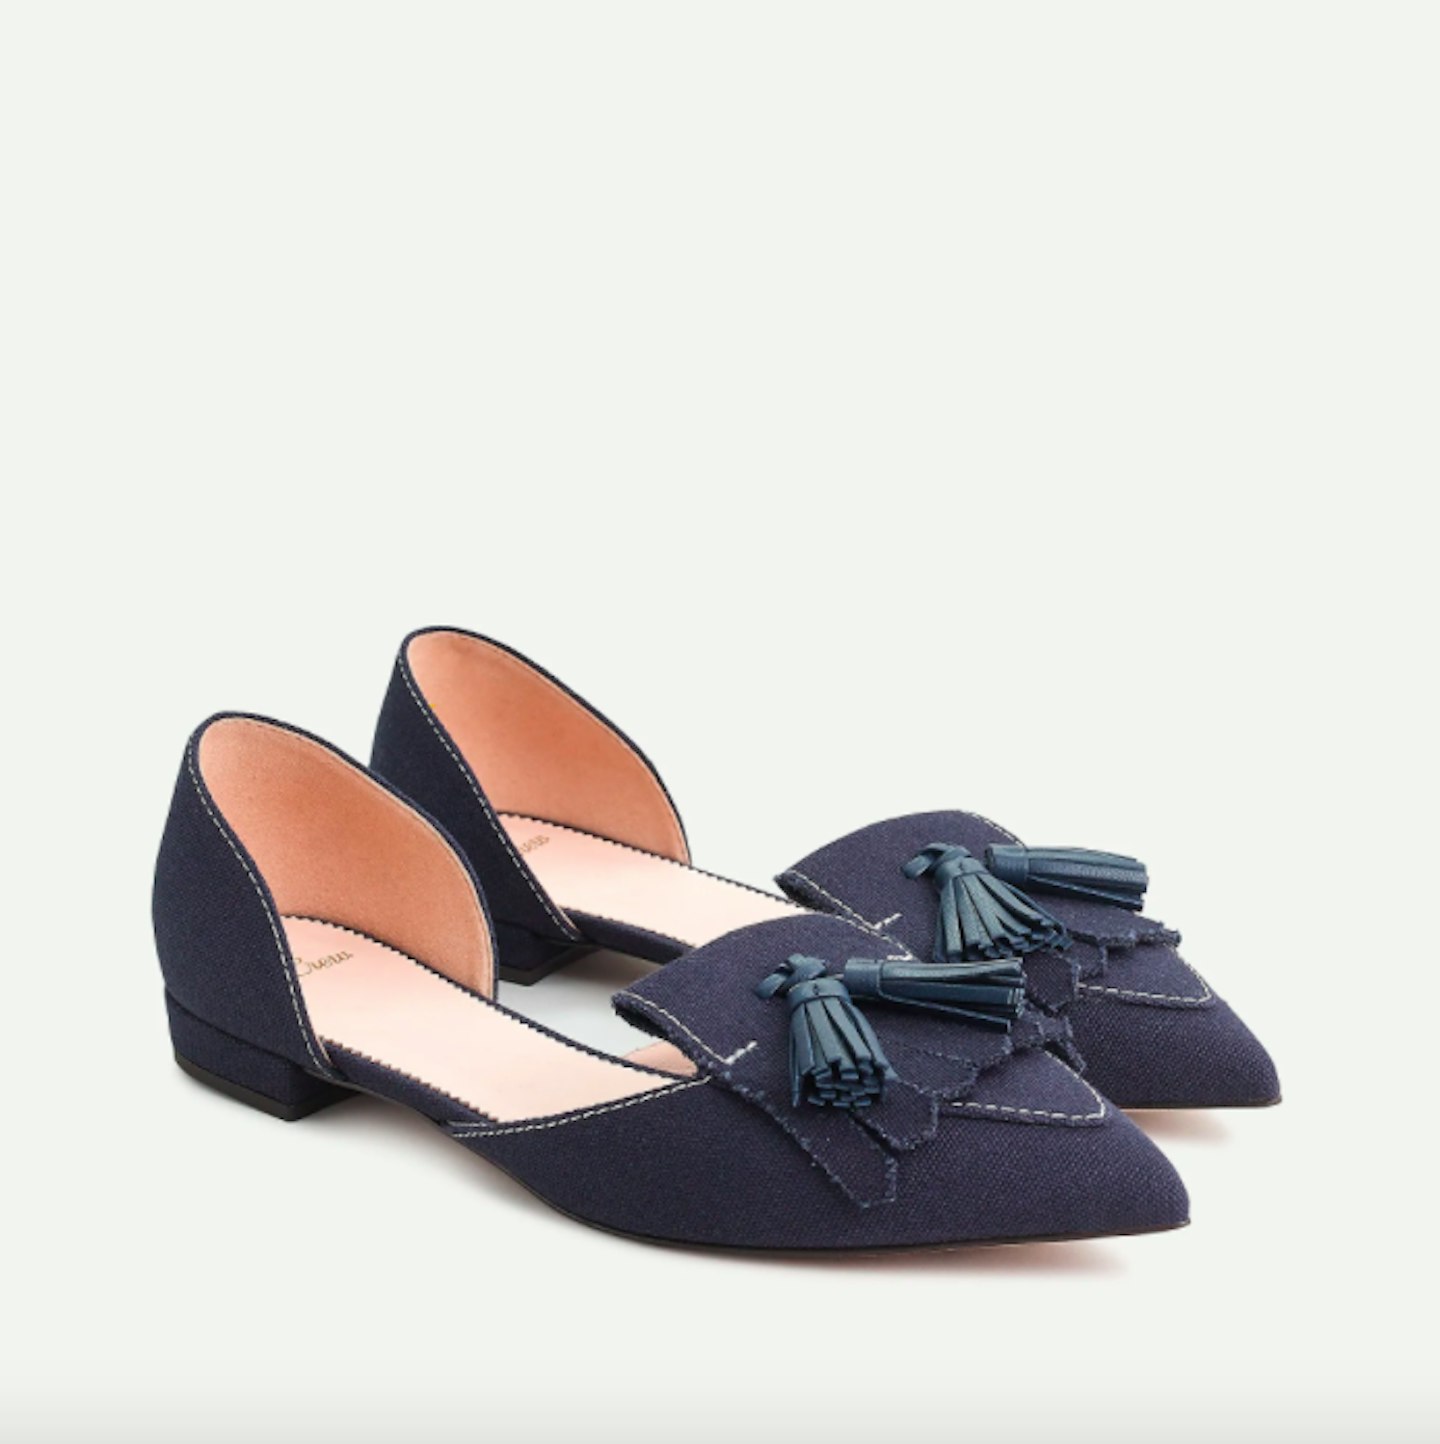 J.Crew, Canvas d'Orsay pointed-toe flats, £165